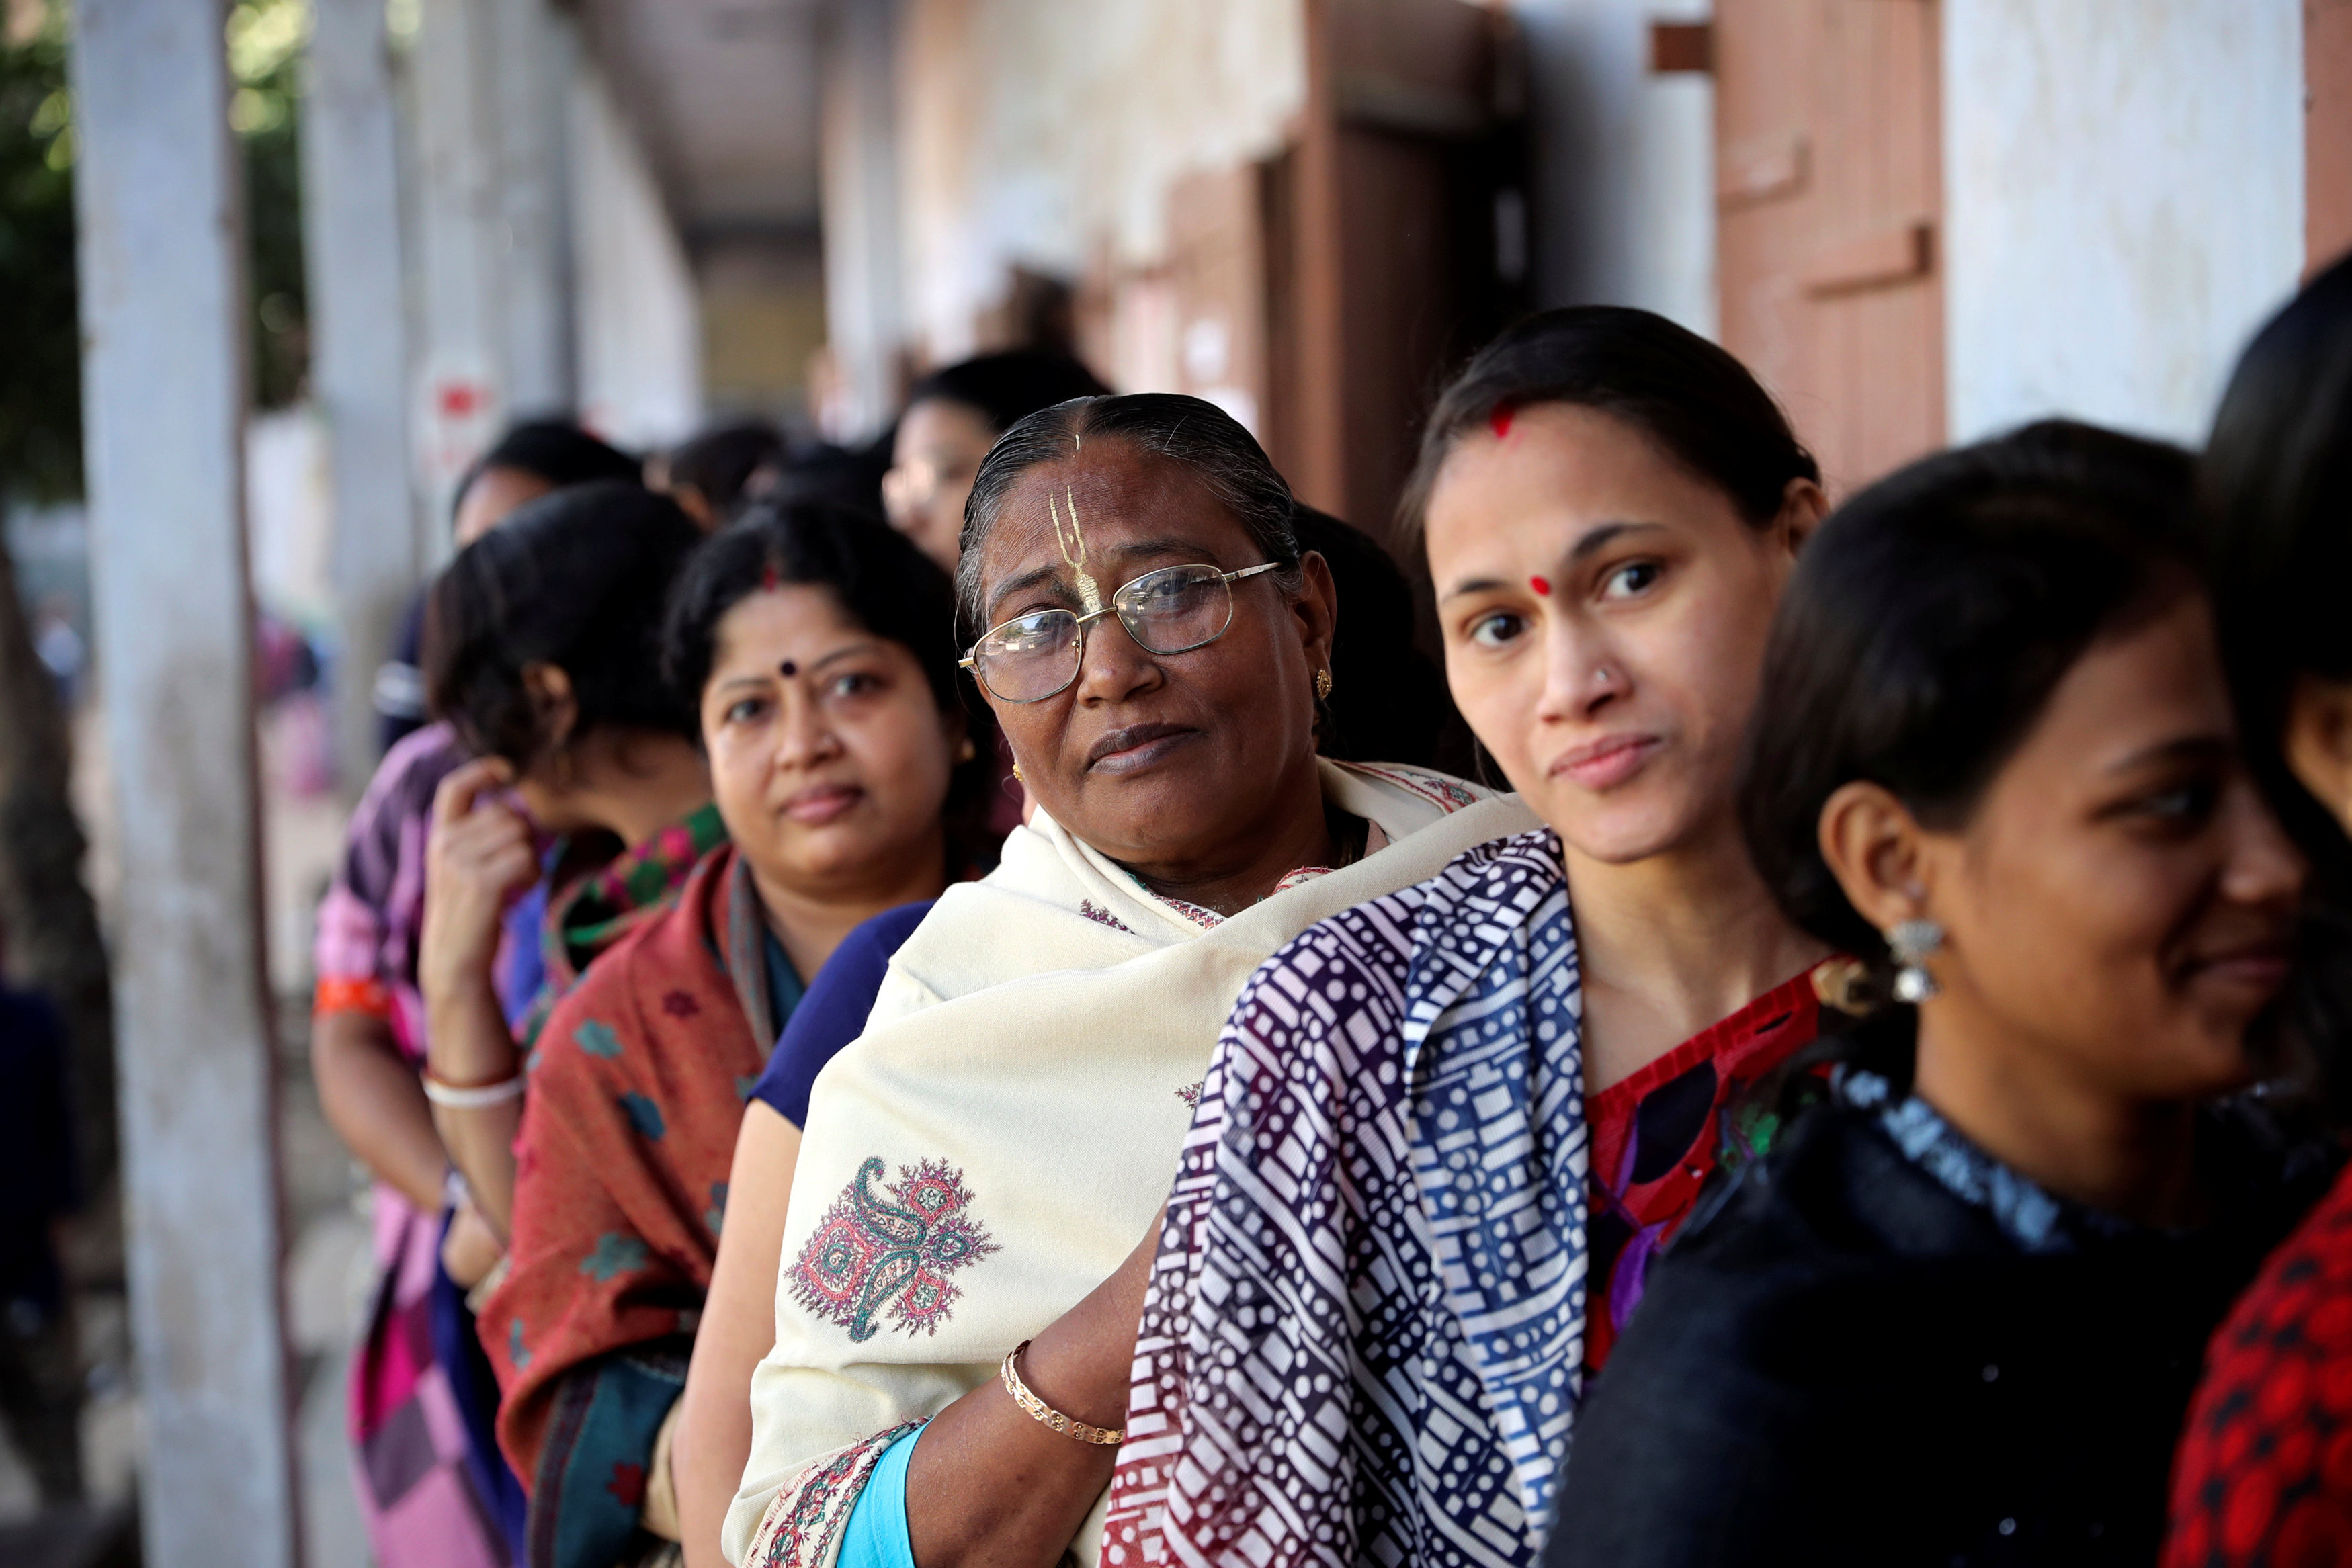 Hindu voters wait to cast their vote outside a voting center during the general election in Dhaka